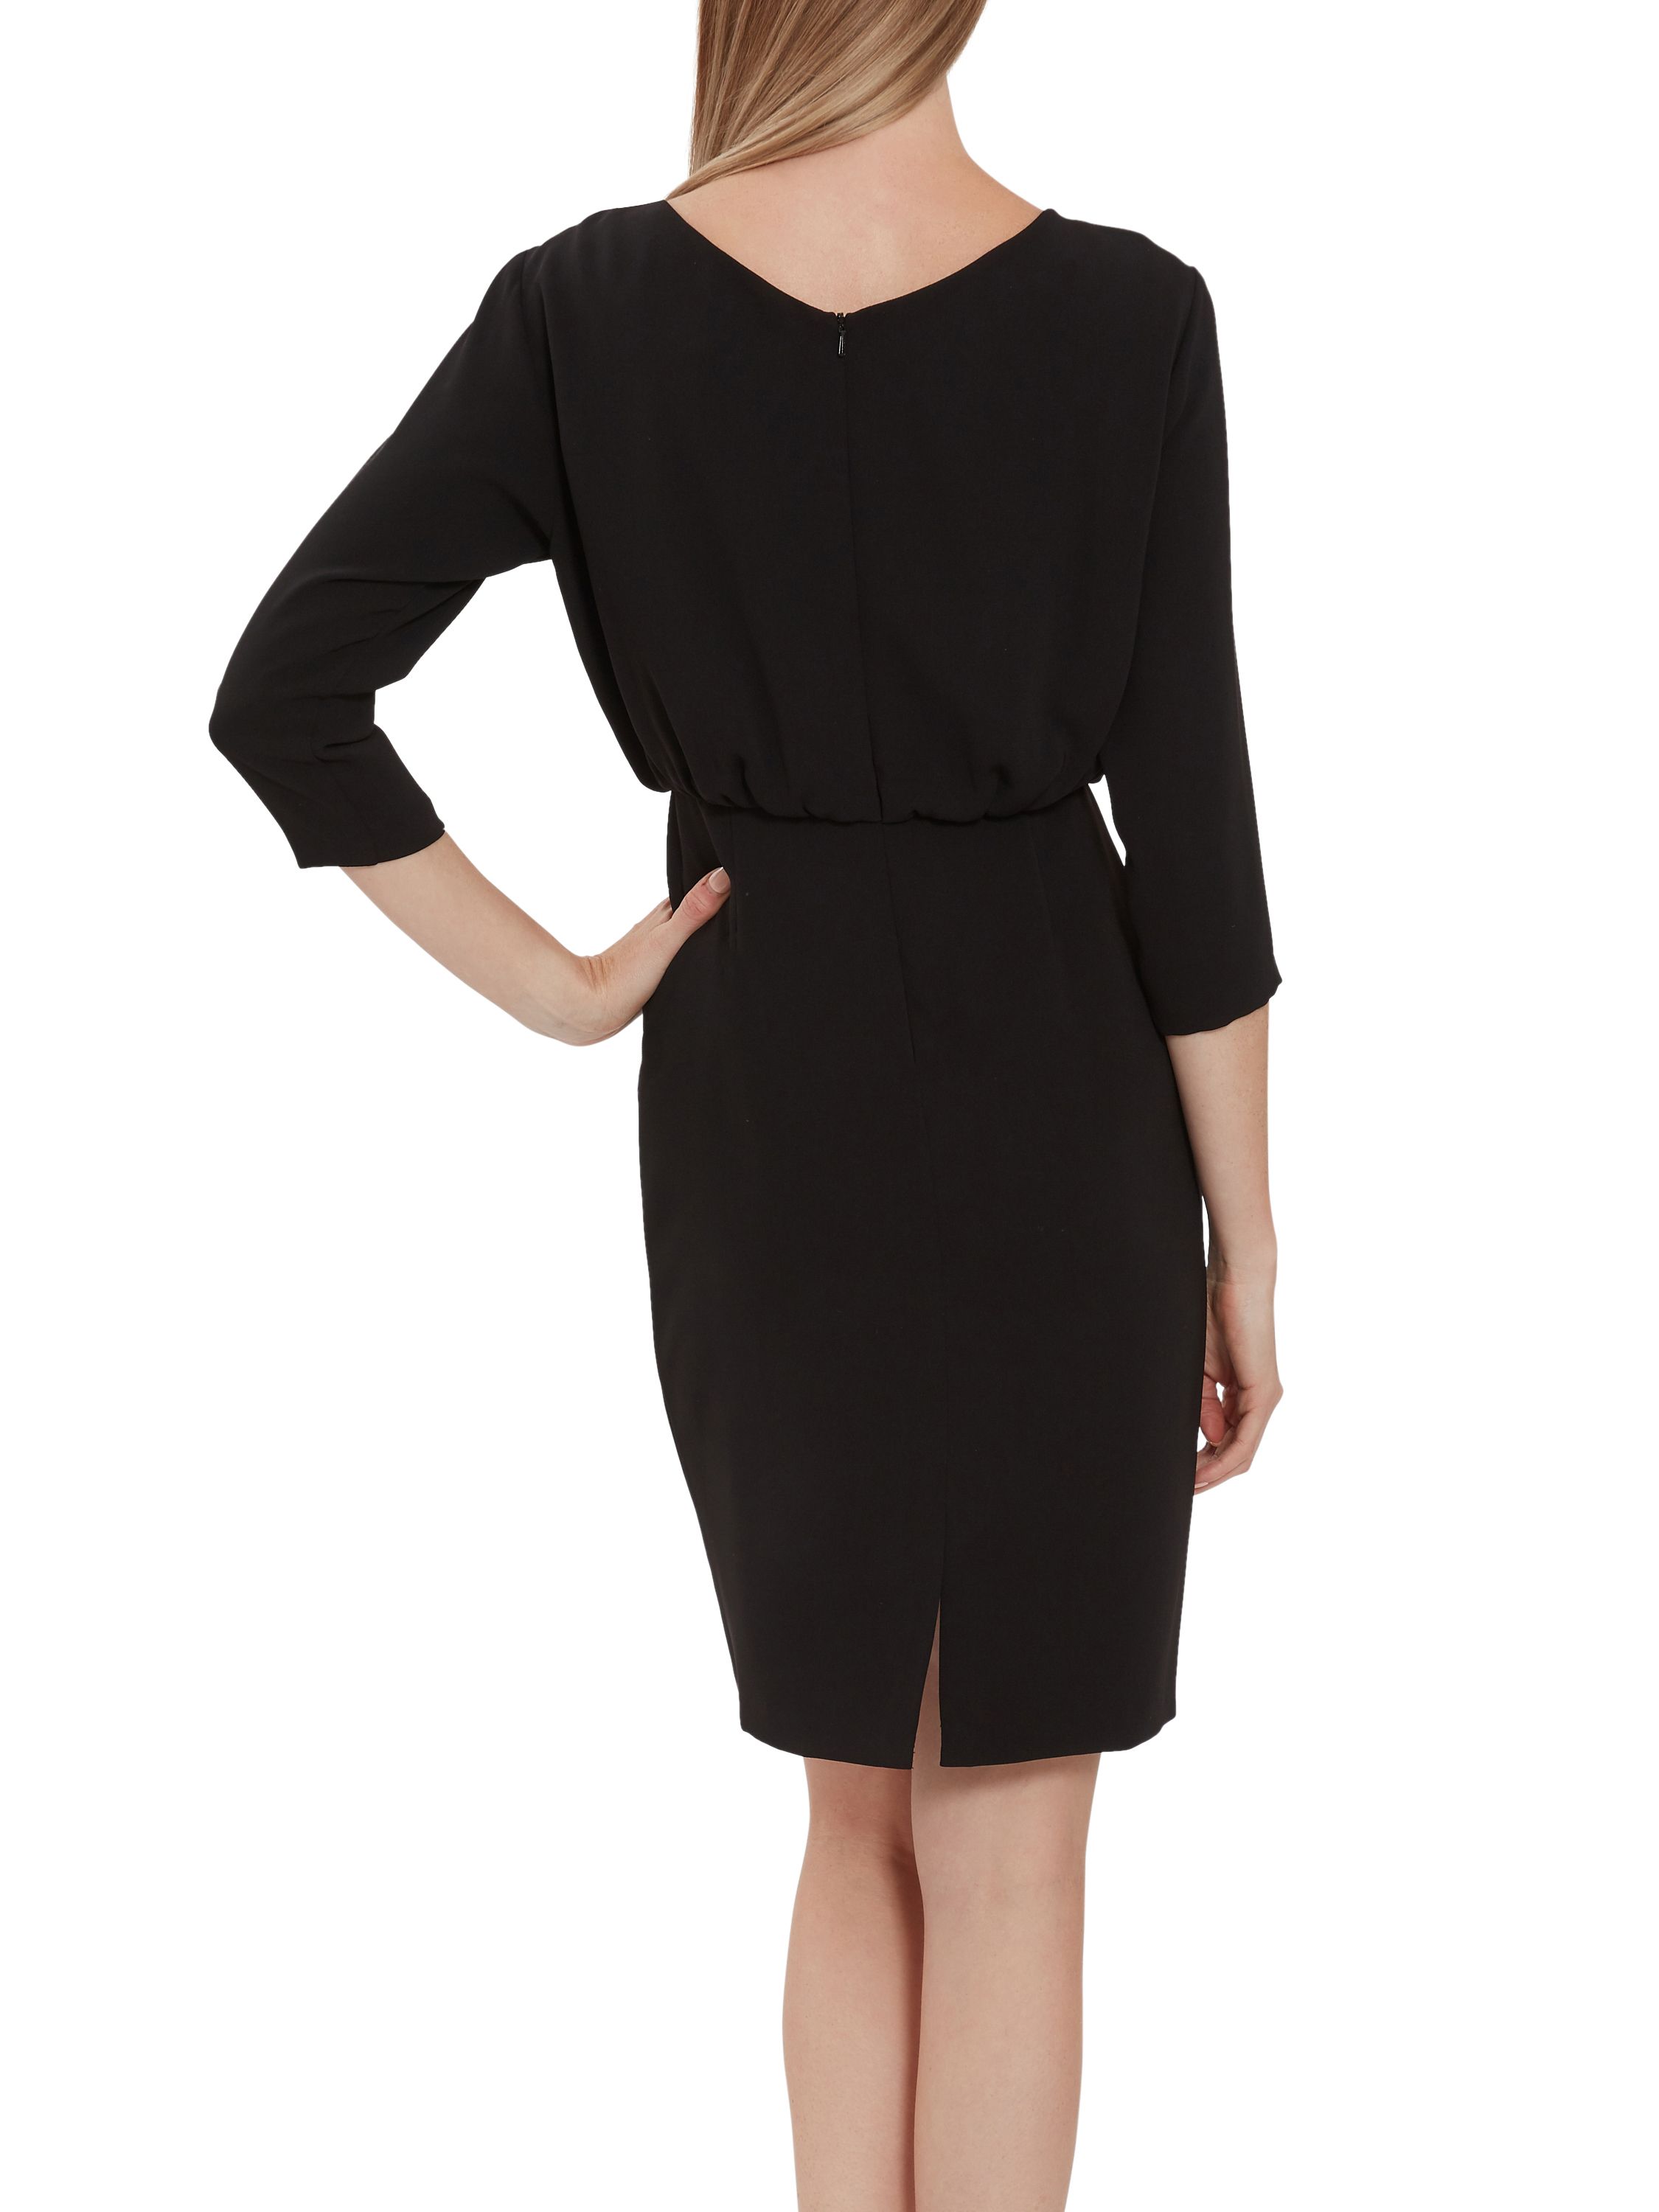 Feel fabulous in this soft crepe dress by Gina Bacconi. It has 1/2 length sleeves and delicate ruching at the waistline with cowl neck detailing for an elegant finish. The dress is fully lined.